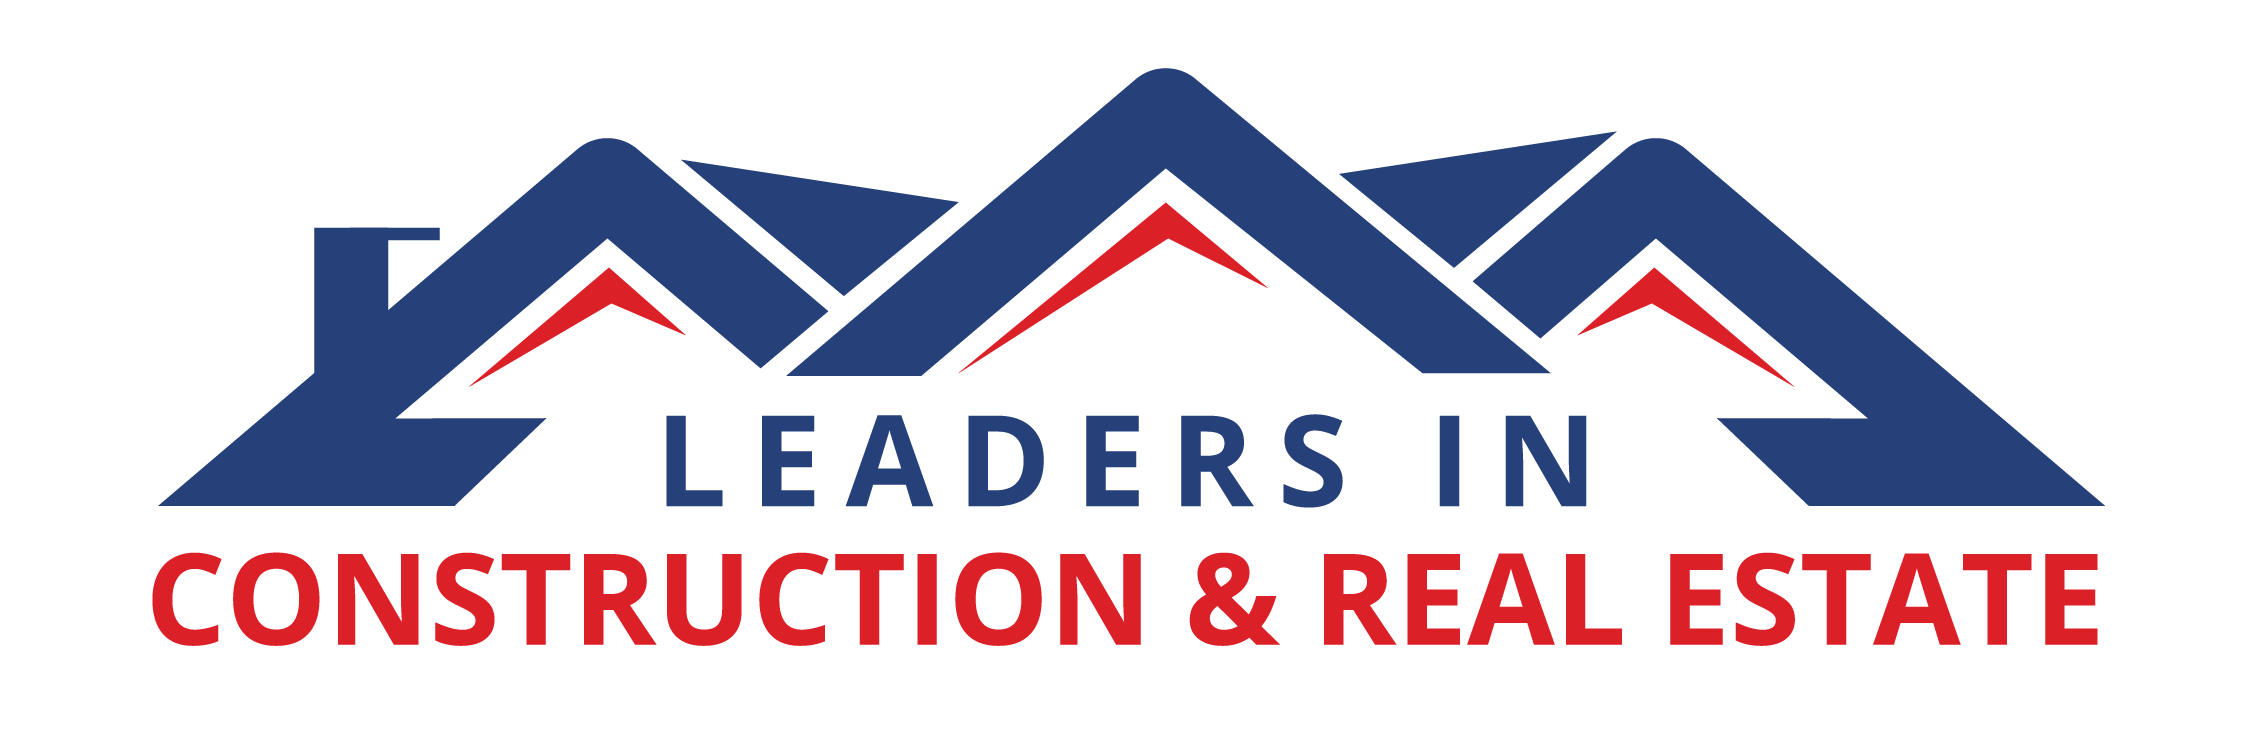 Leaders-in-CRE-logo